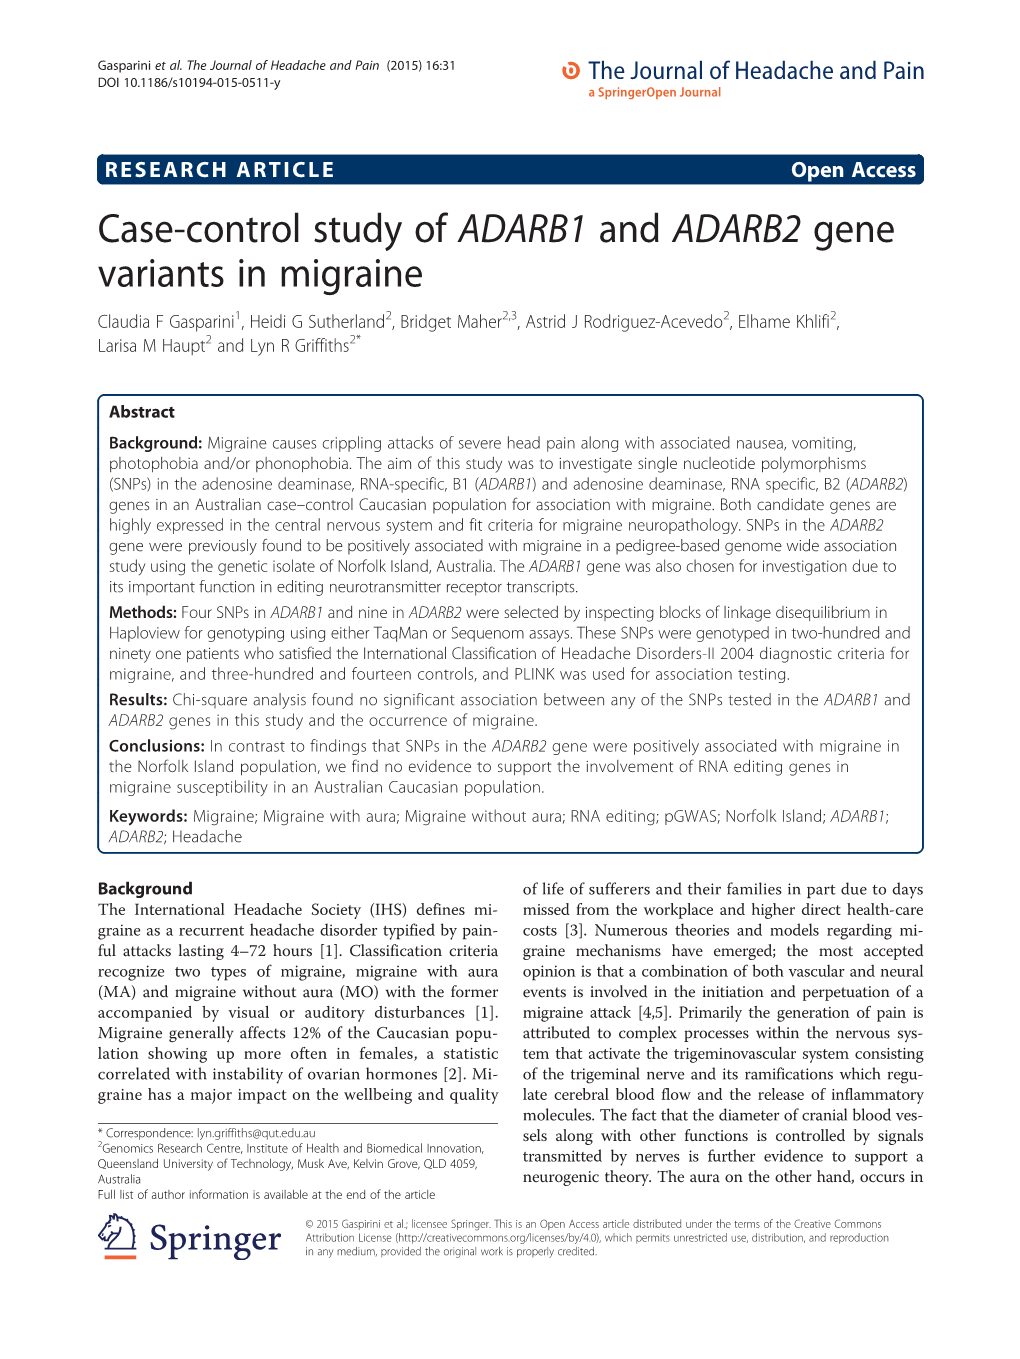 Case-Control Study of ADARB1 and ADARB2 Gene Variants in Migraine